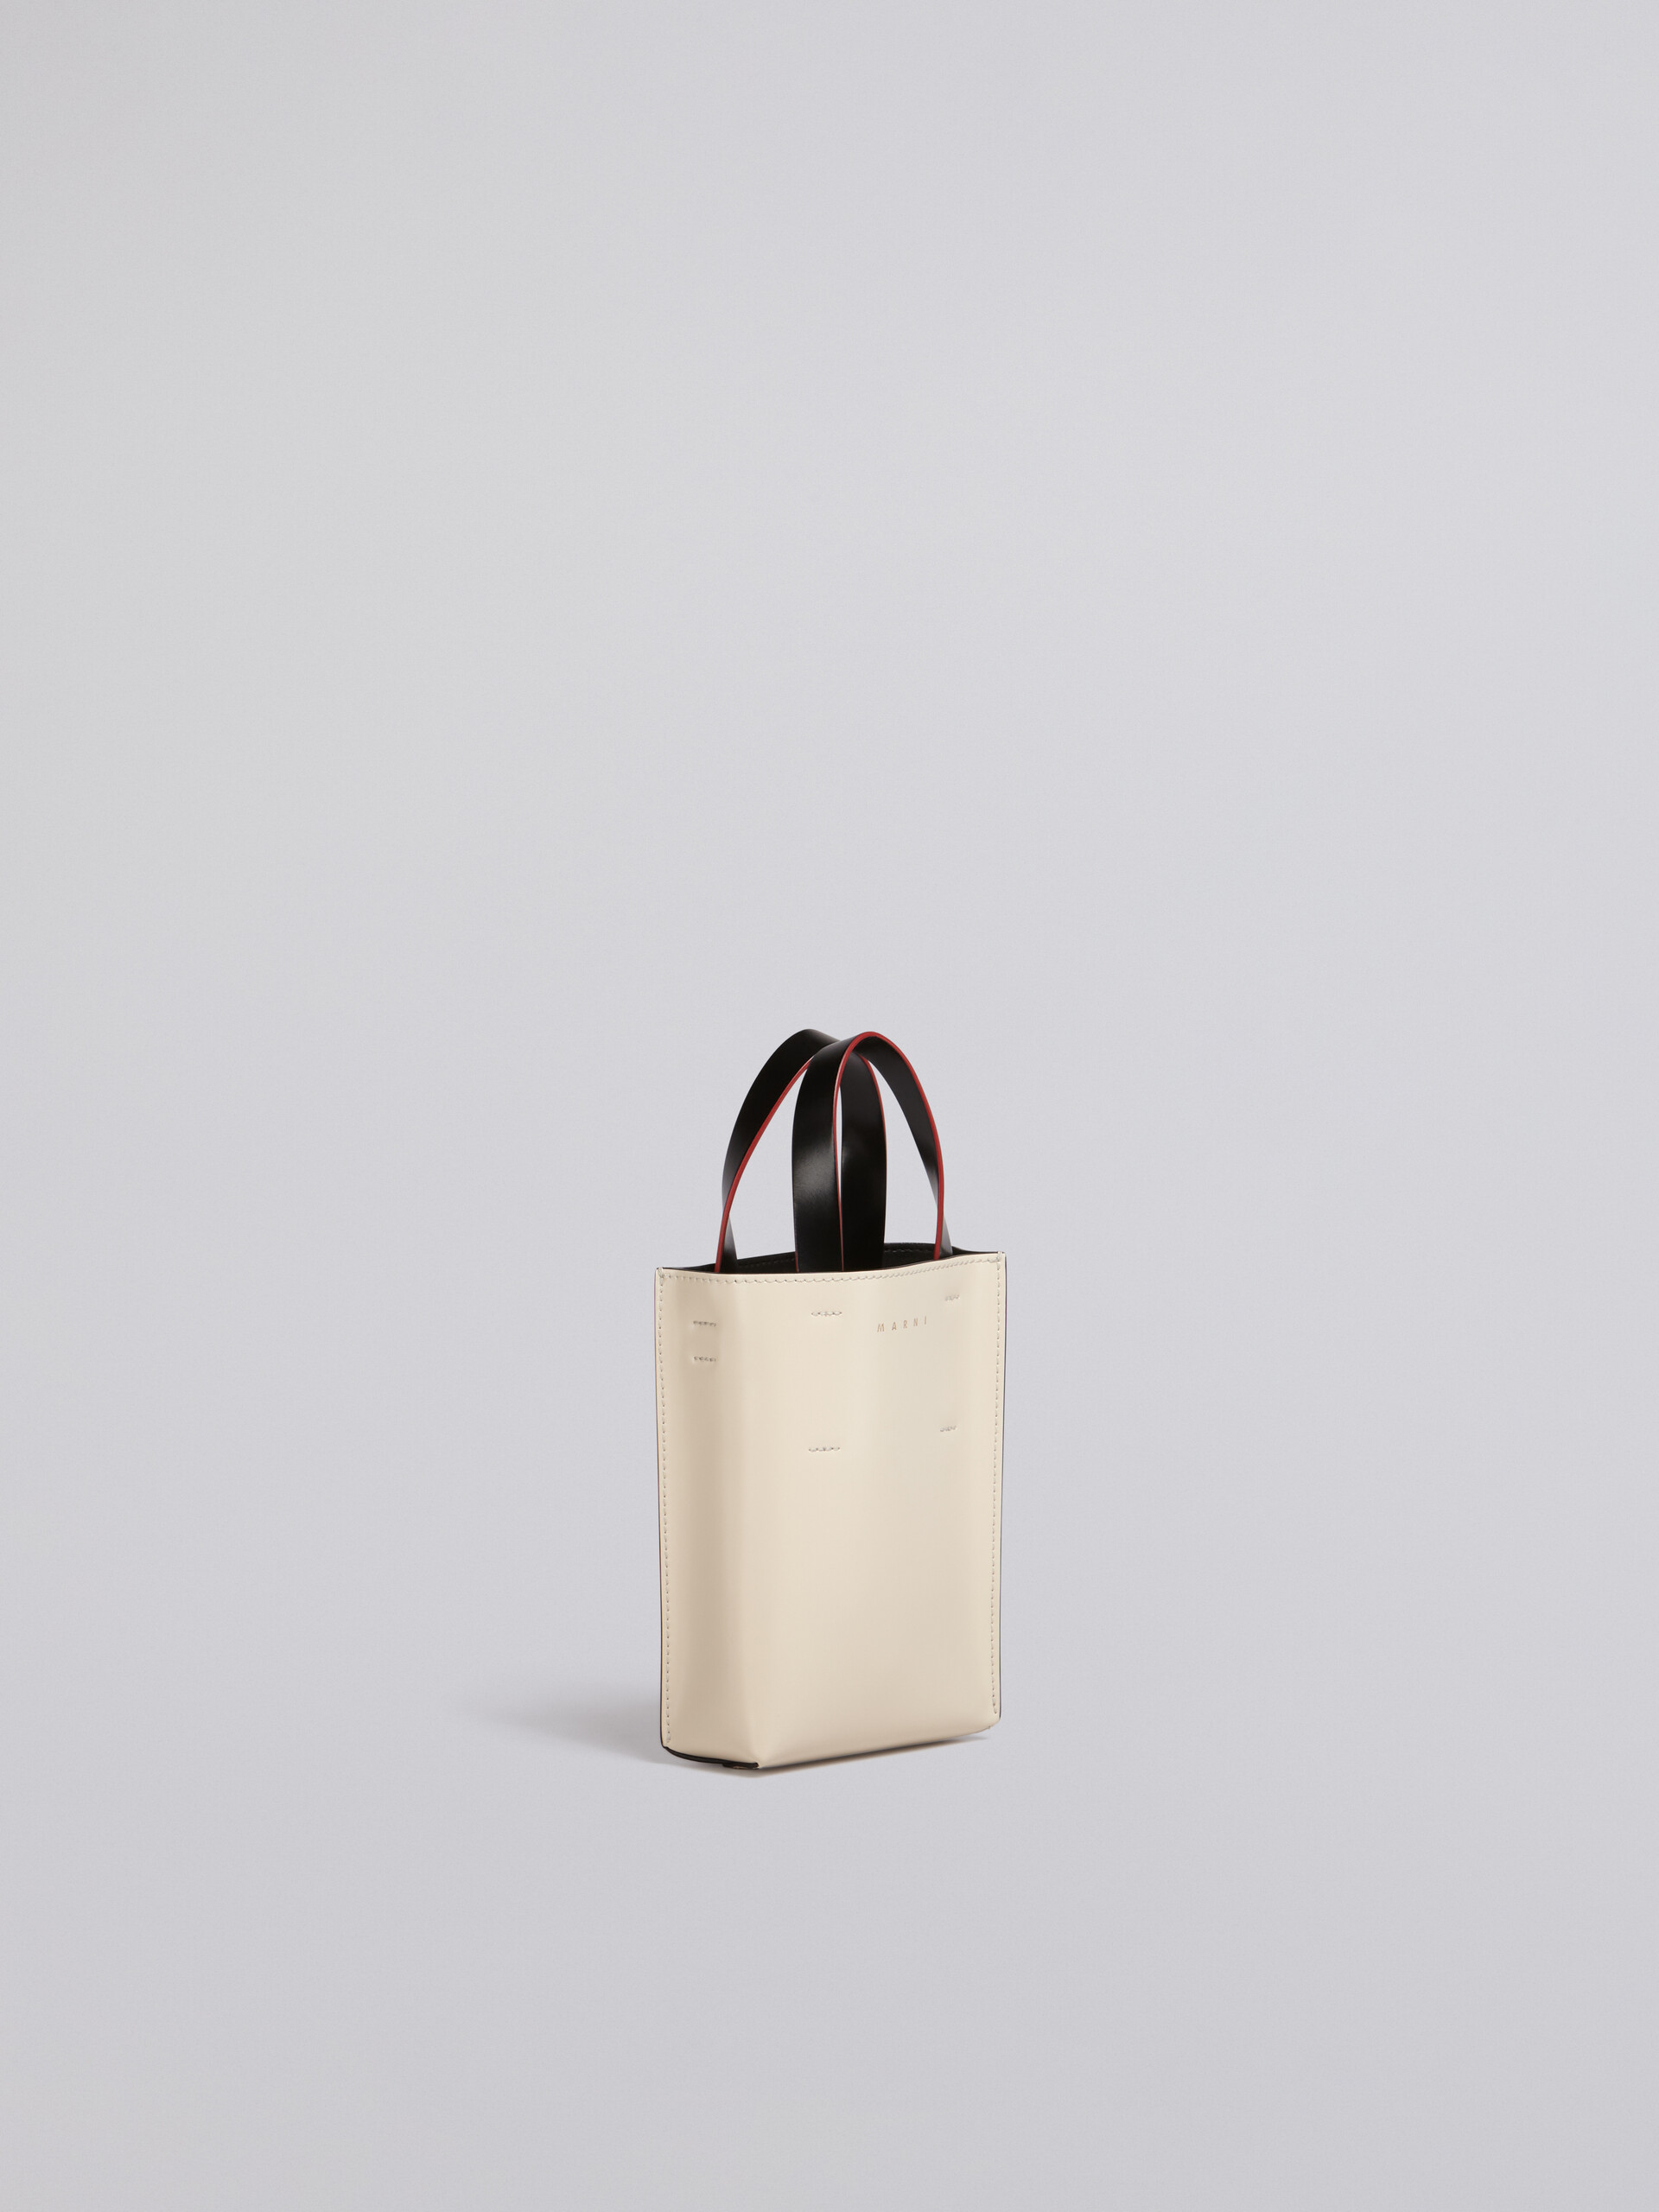 Nano MUSEO shopping bag in beige and pink smooth calfskin with shoulder strap - Shopping Bags - Image 5